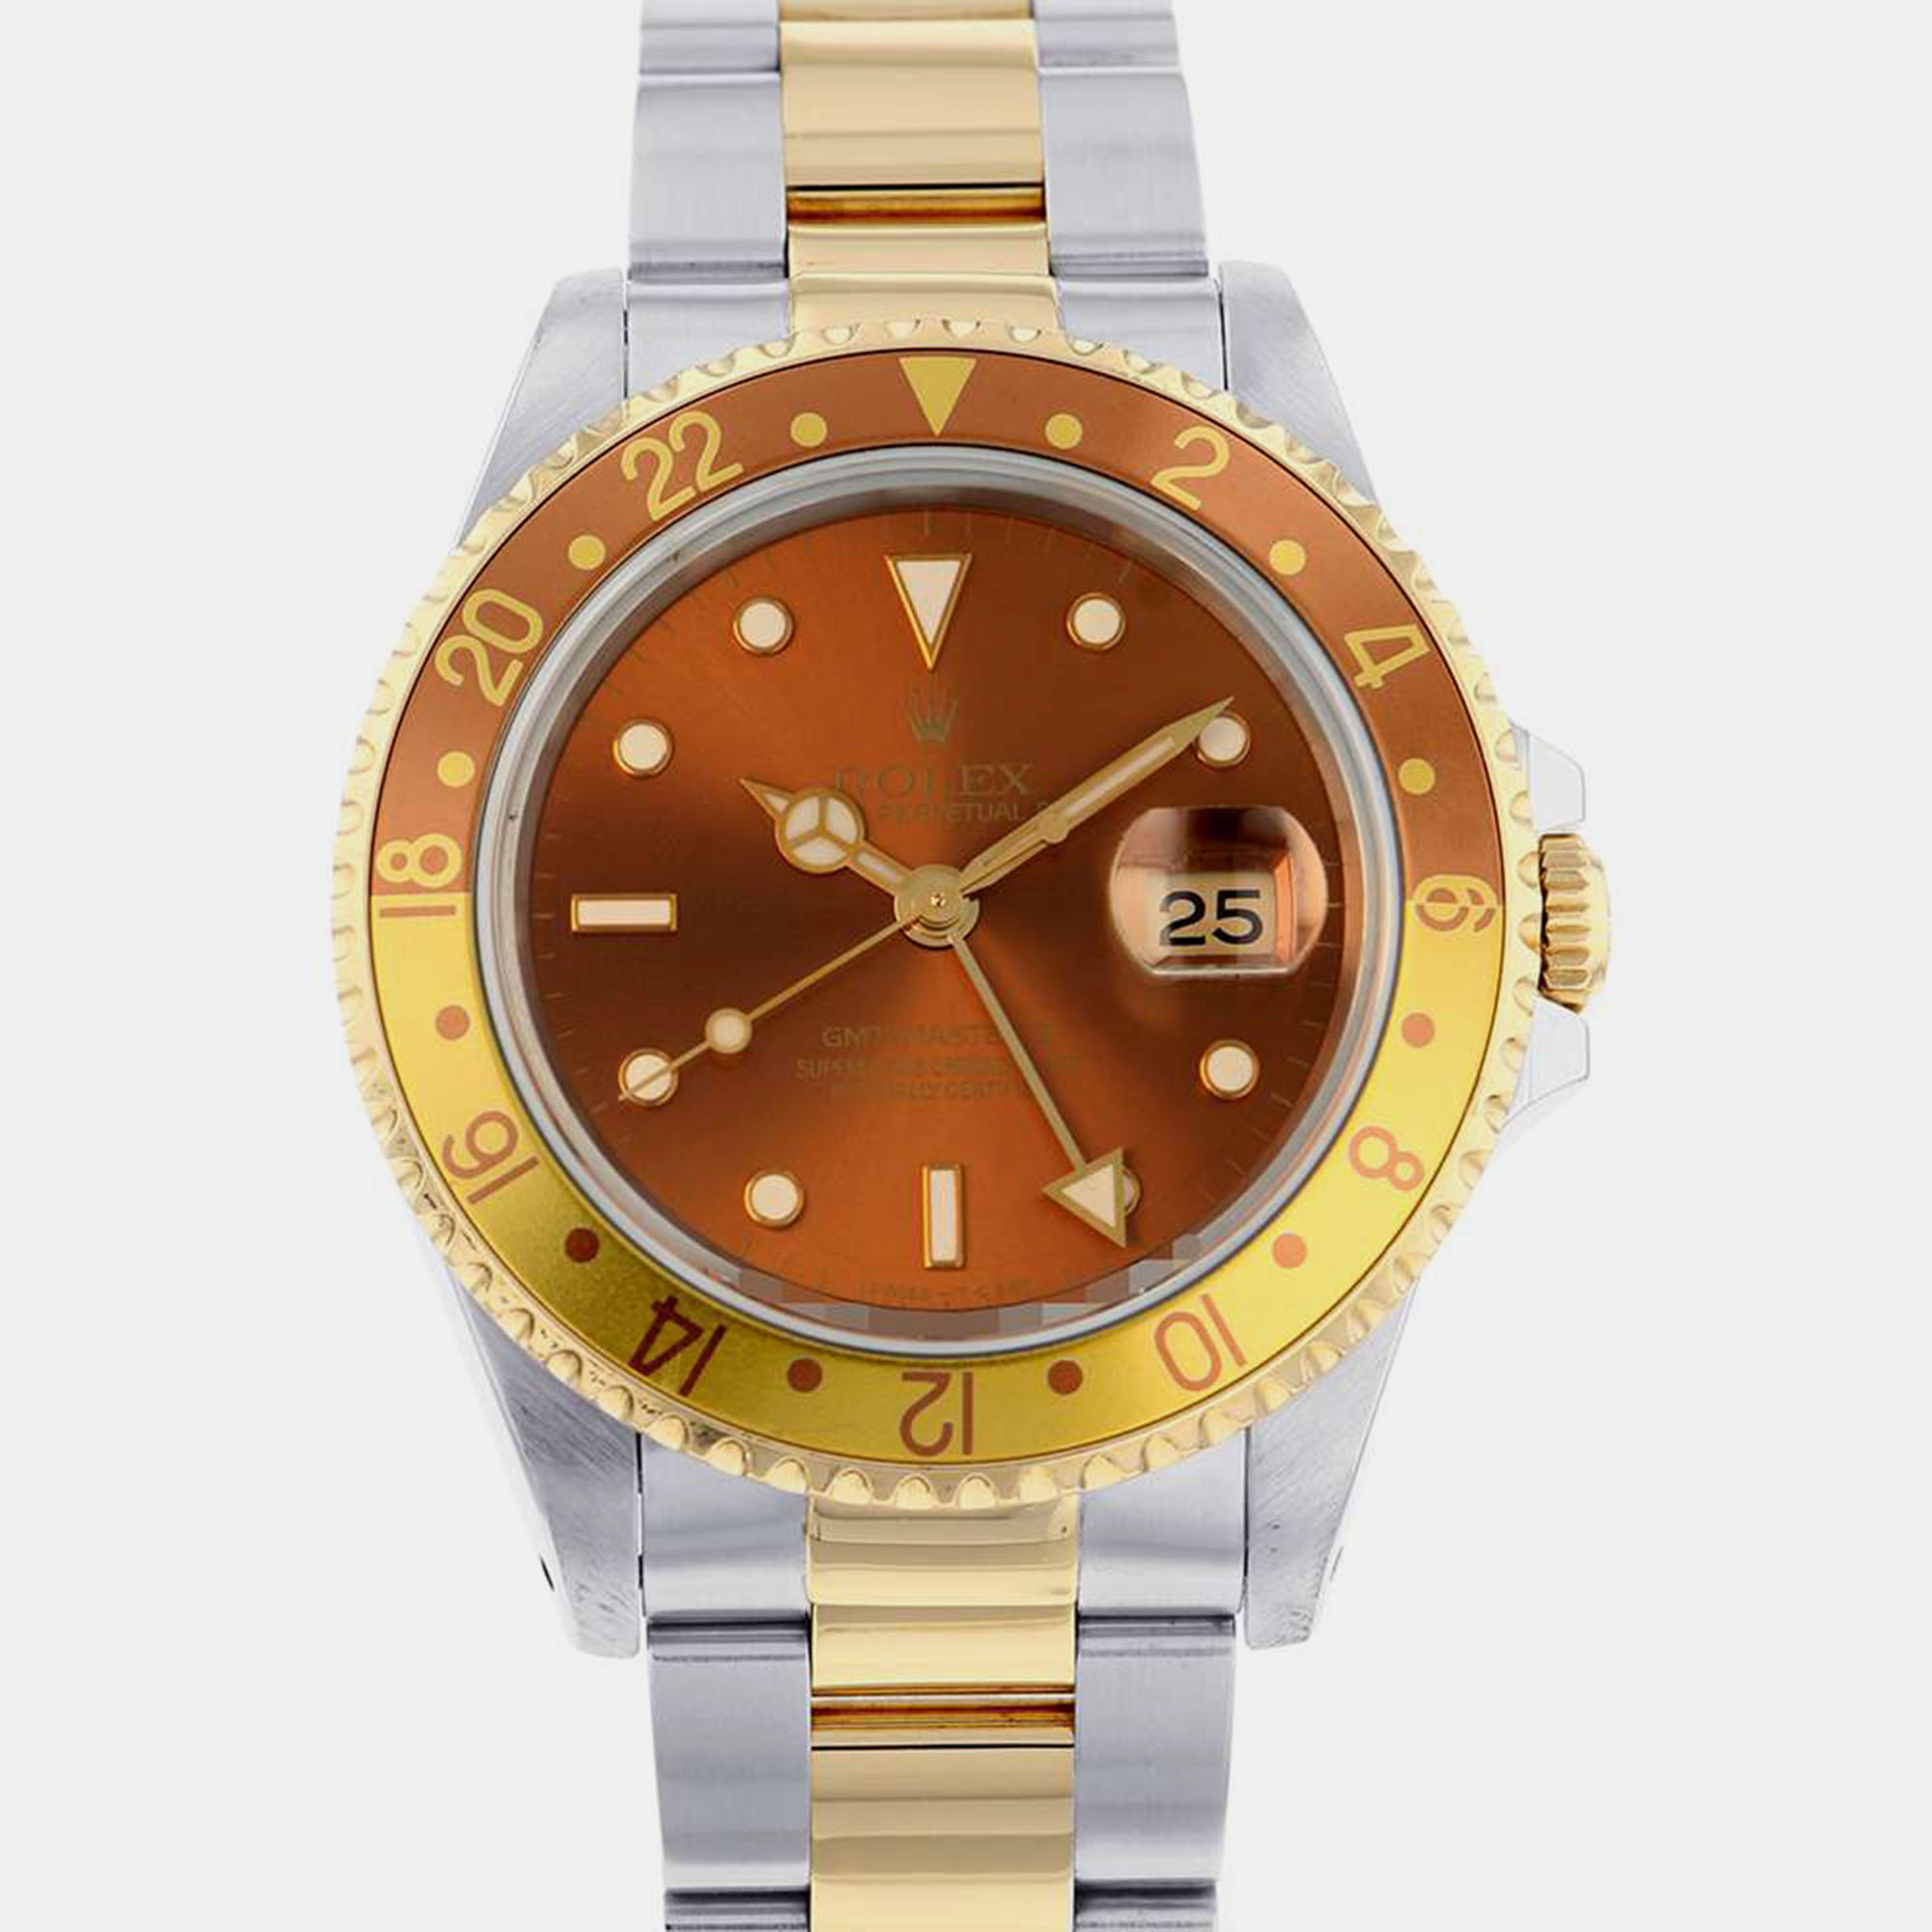 Rolex Brown 18k Yellow Gold And Stainless Steel GMT-Master II 16713 Automatic Men's Wristwatch 40 Mm